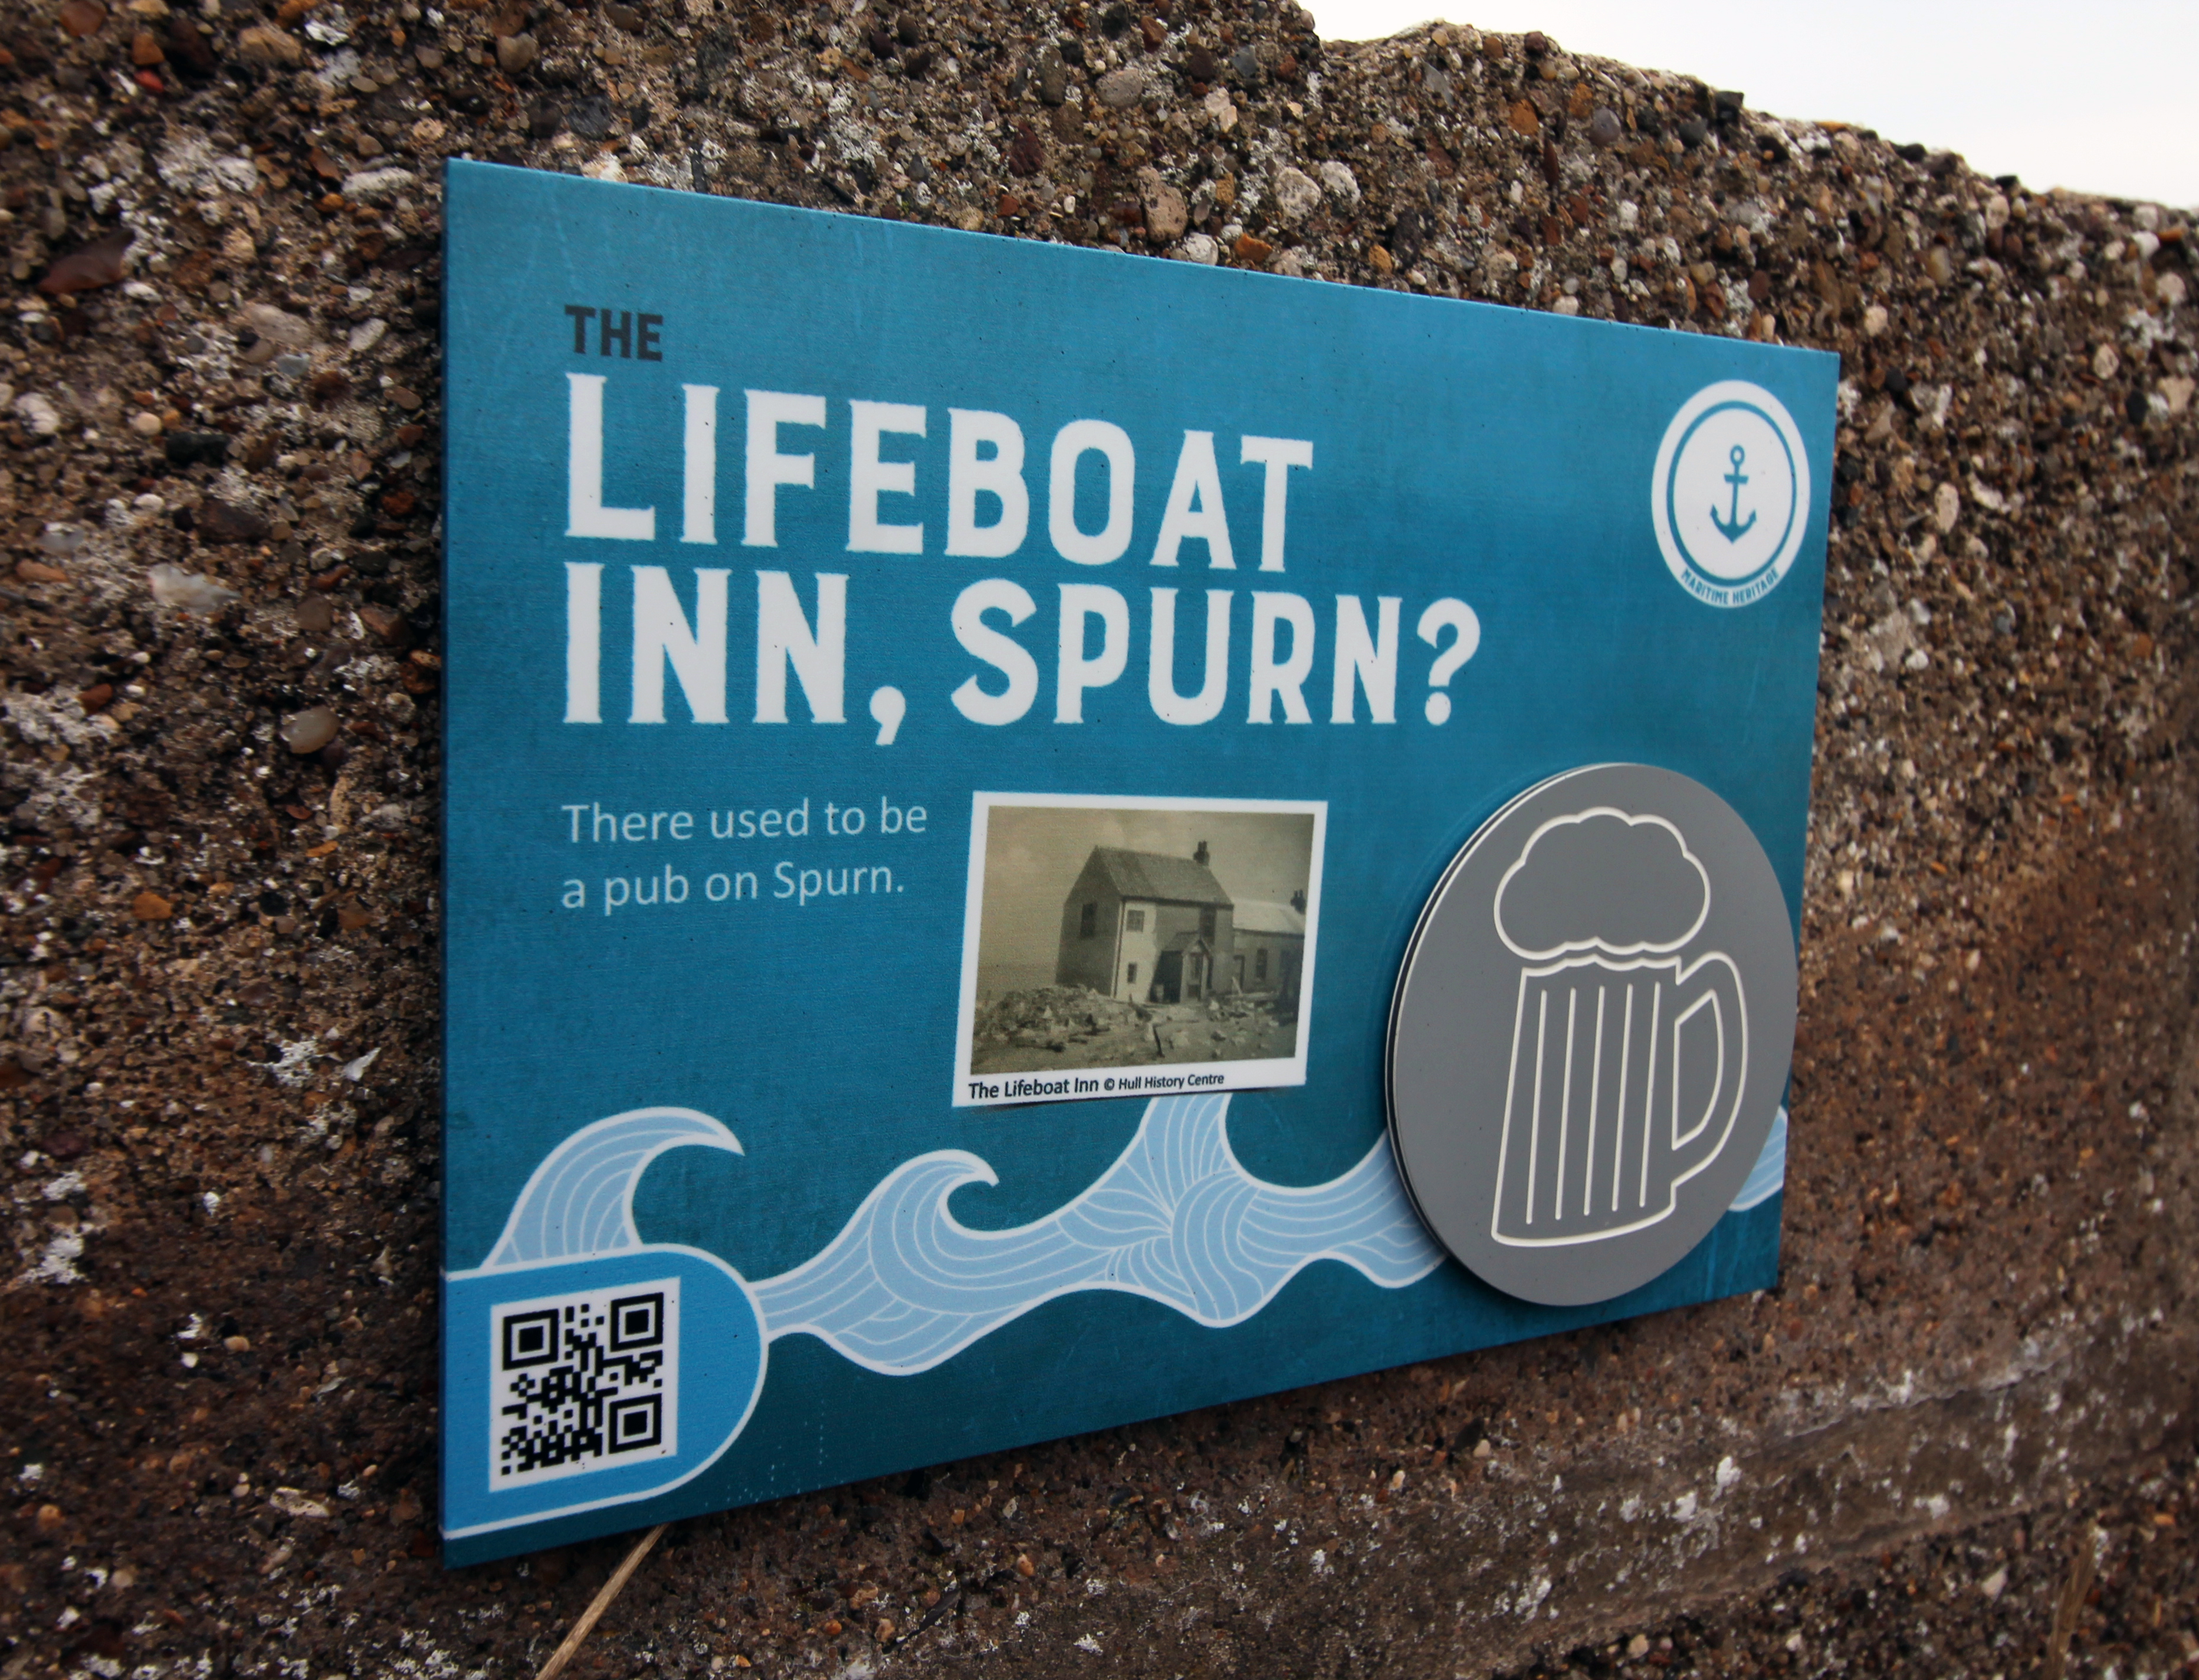 Sign showing site of Lifeboat Inn, 2019